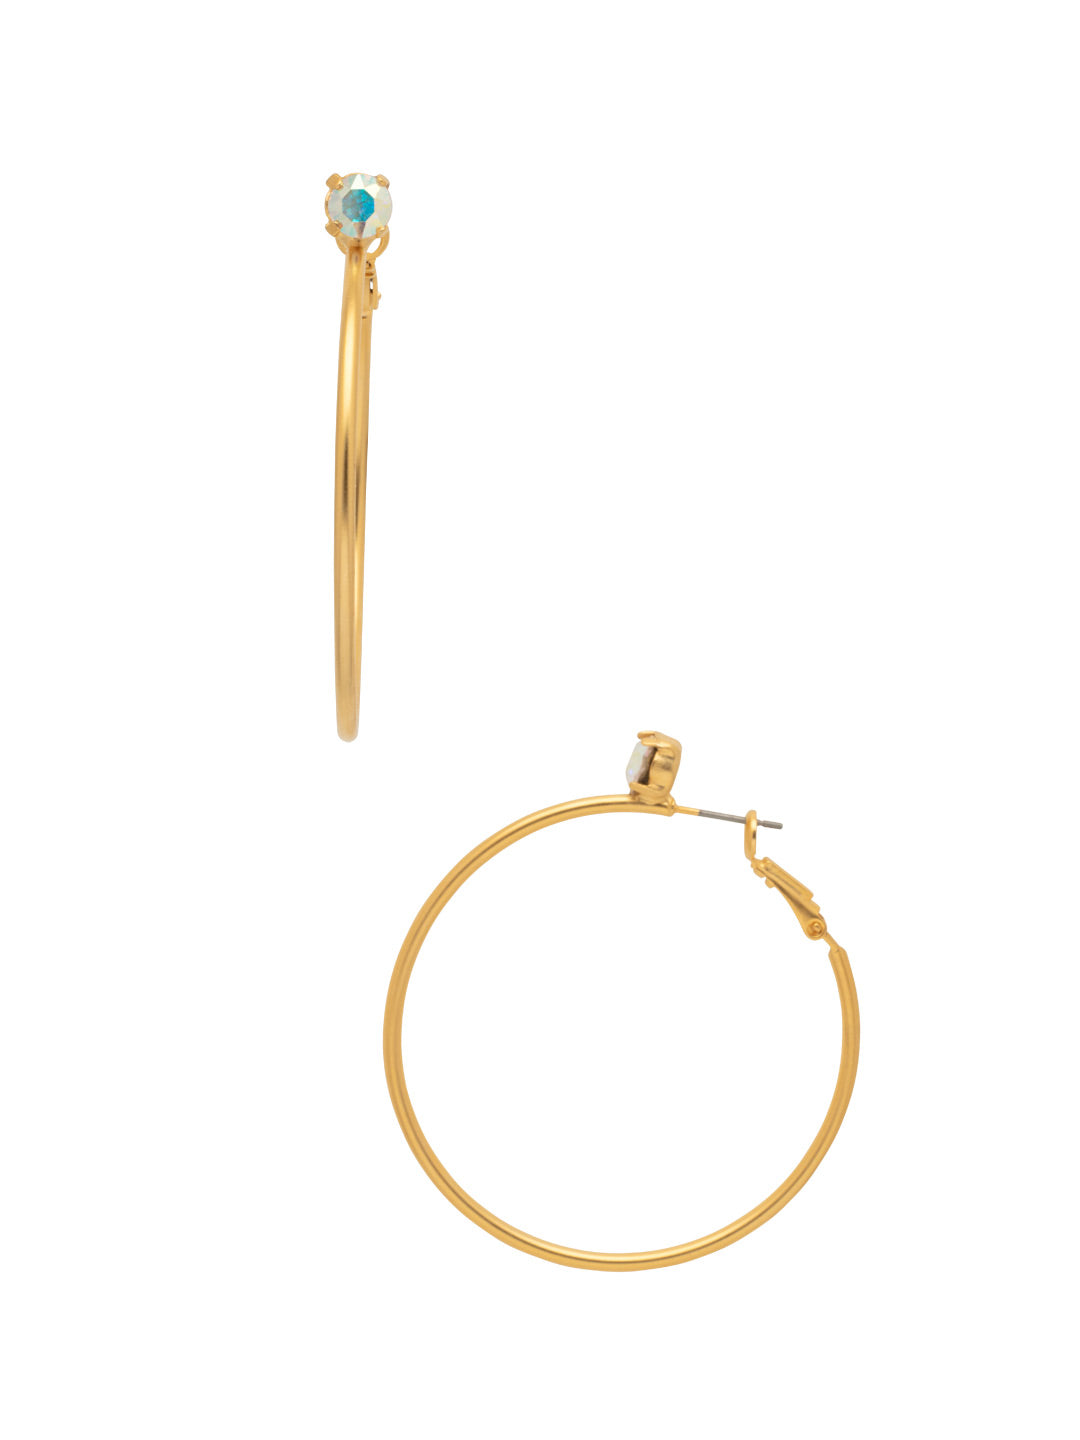 Serafina Hoop Earrings - EEP41MGCAB - <p>Take the classic metal hoop up a notch with the Serafina Hoop Earring. Starting with a single crystal sparkler, it's got that extra something special. From Sorrelli's Crystal Aurora Borealis collection in our Matte Gold-tone finish.</p>